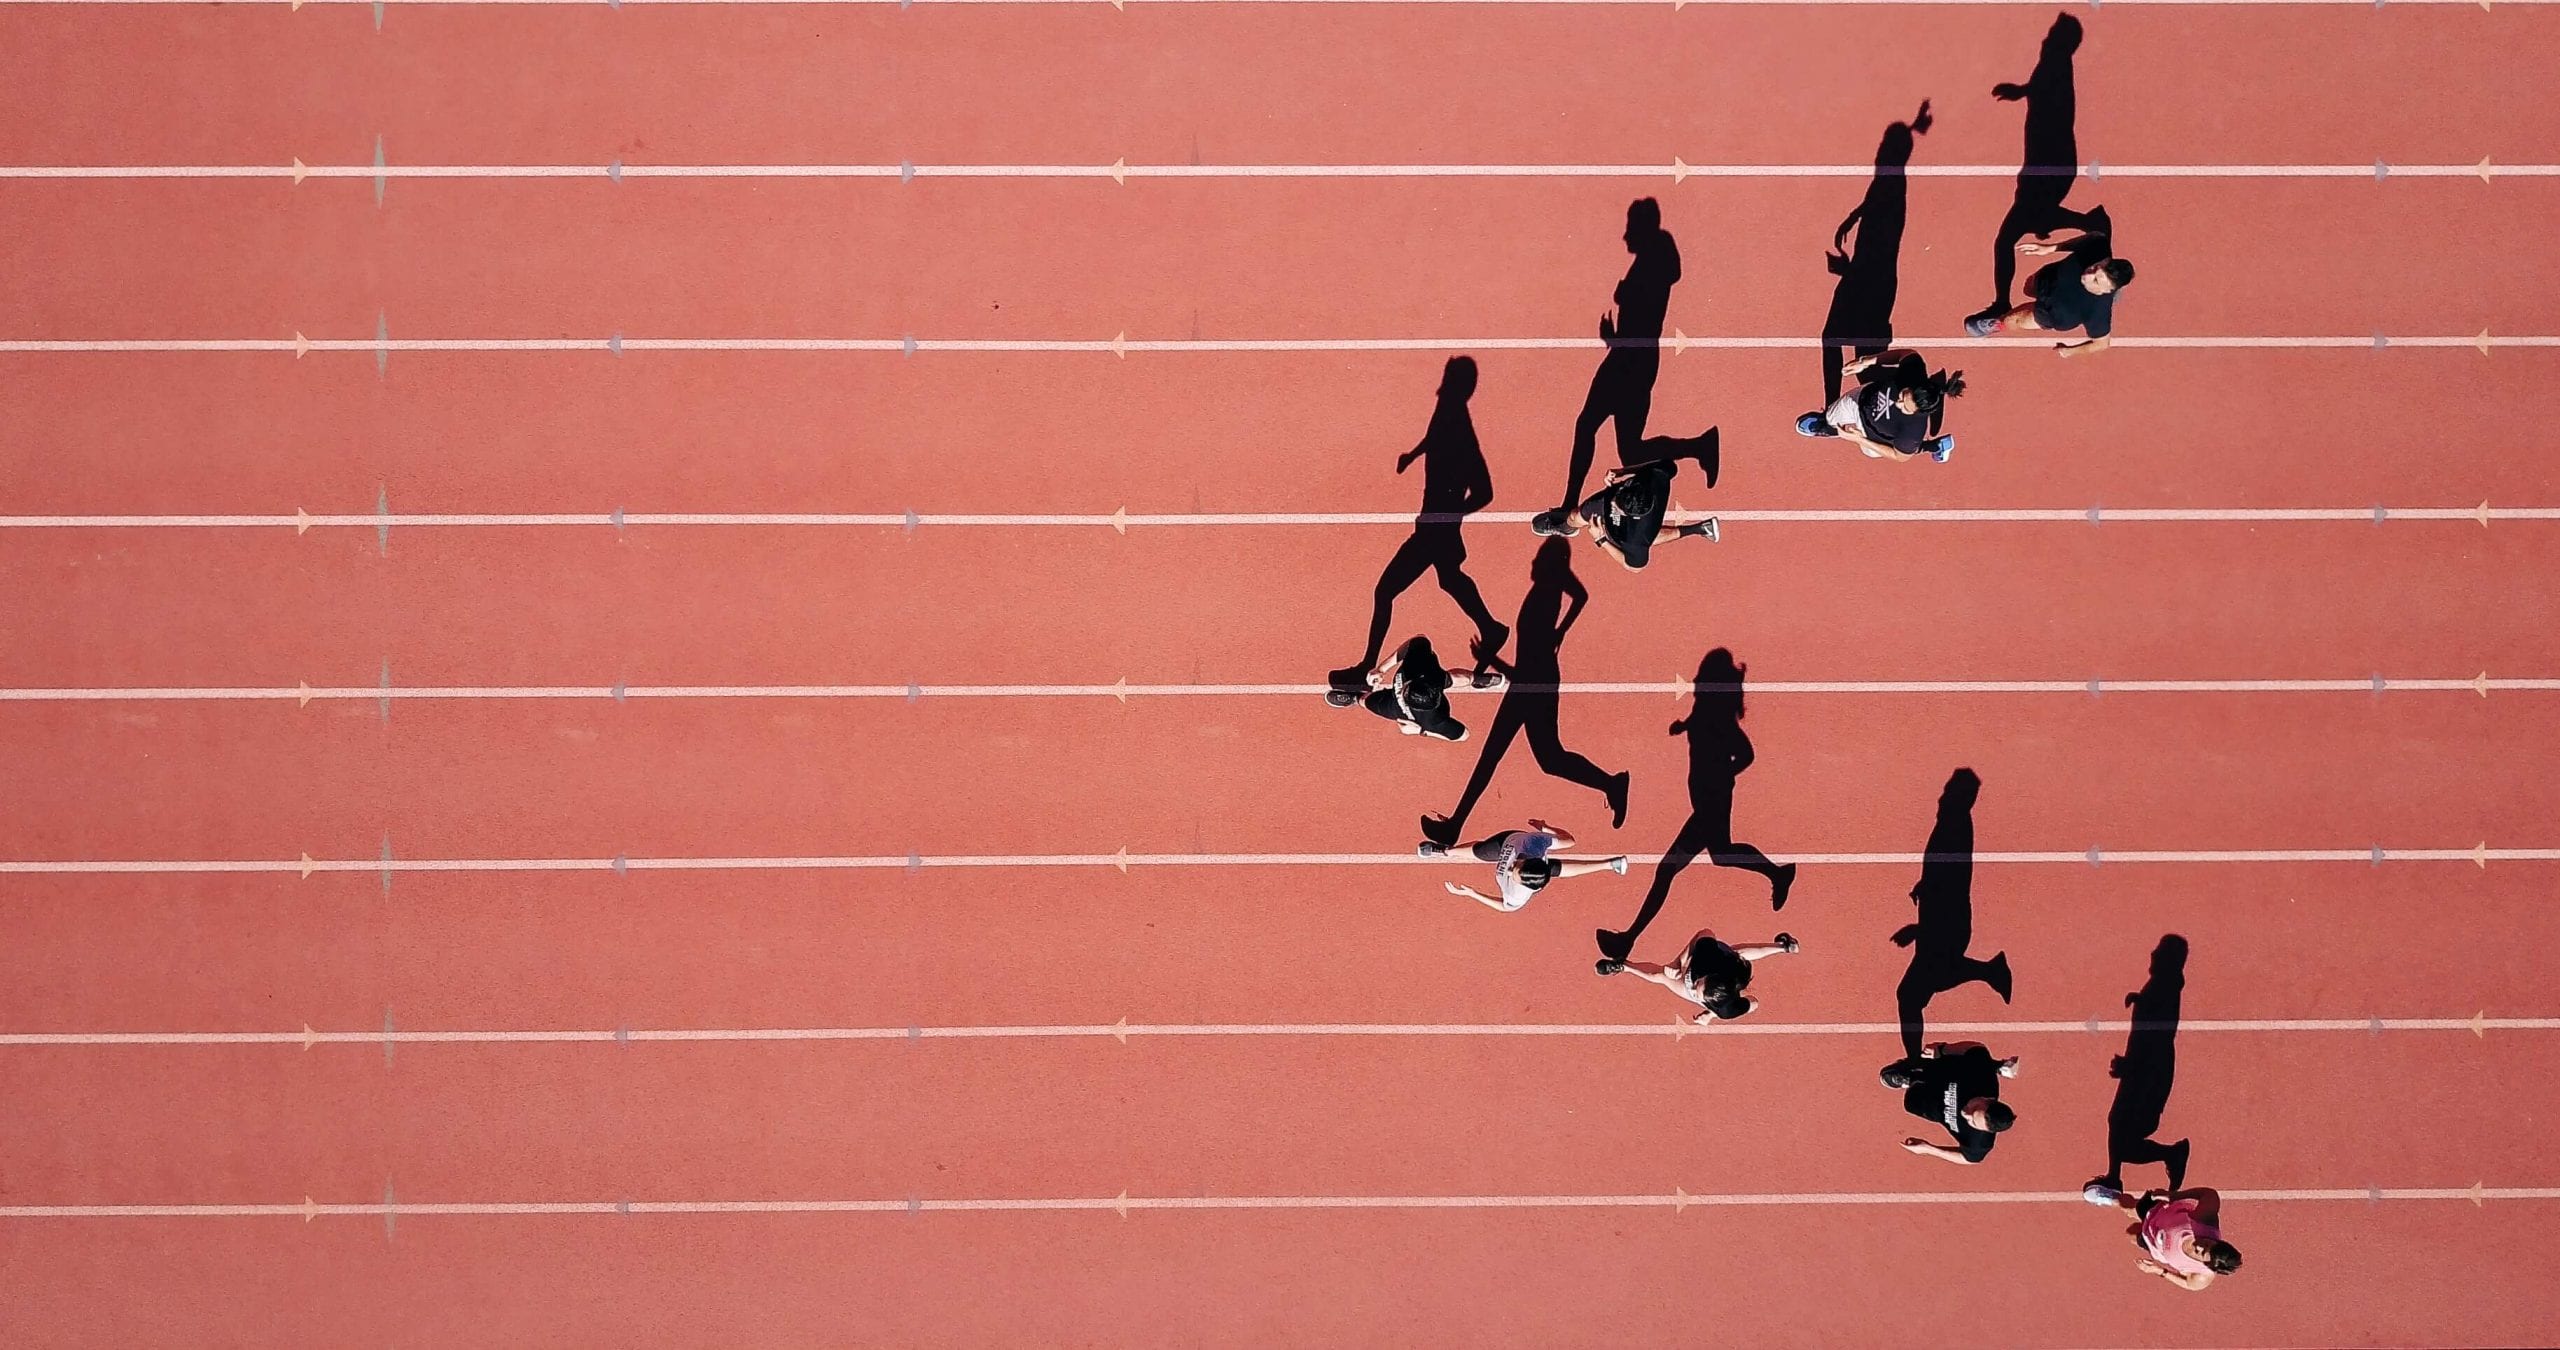 Group of people running on a track in a stadium